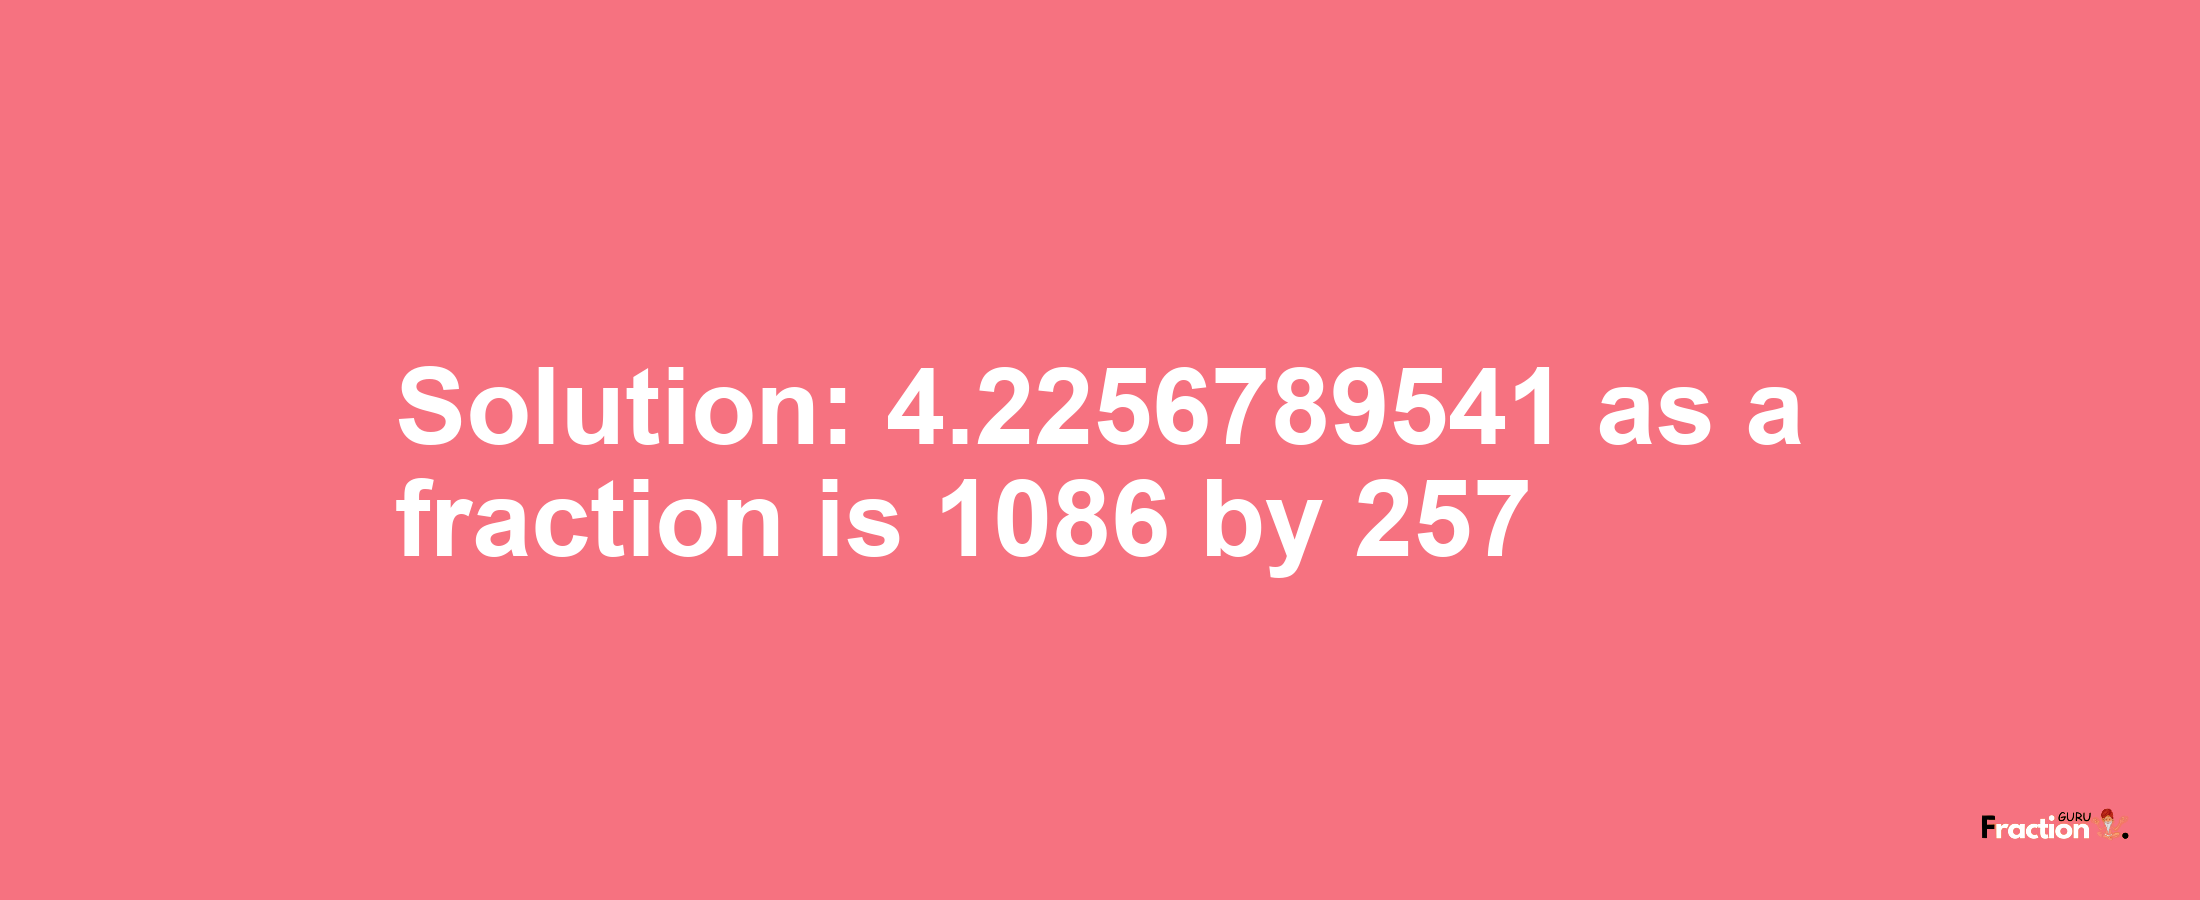 Solution:4.2256789541 as a fraction is 1086/257